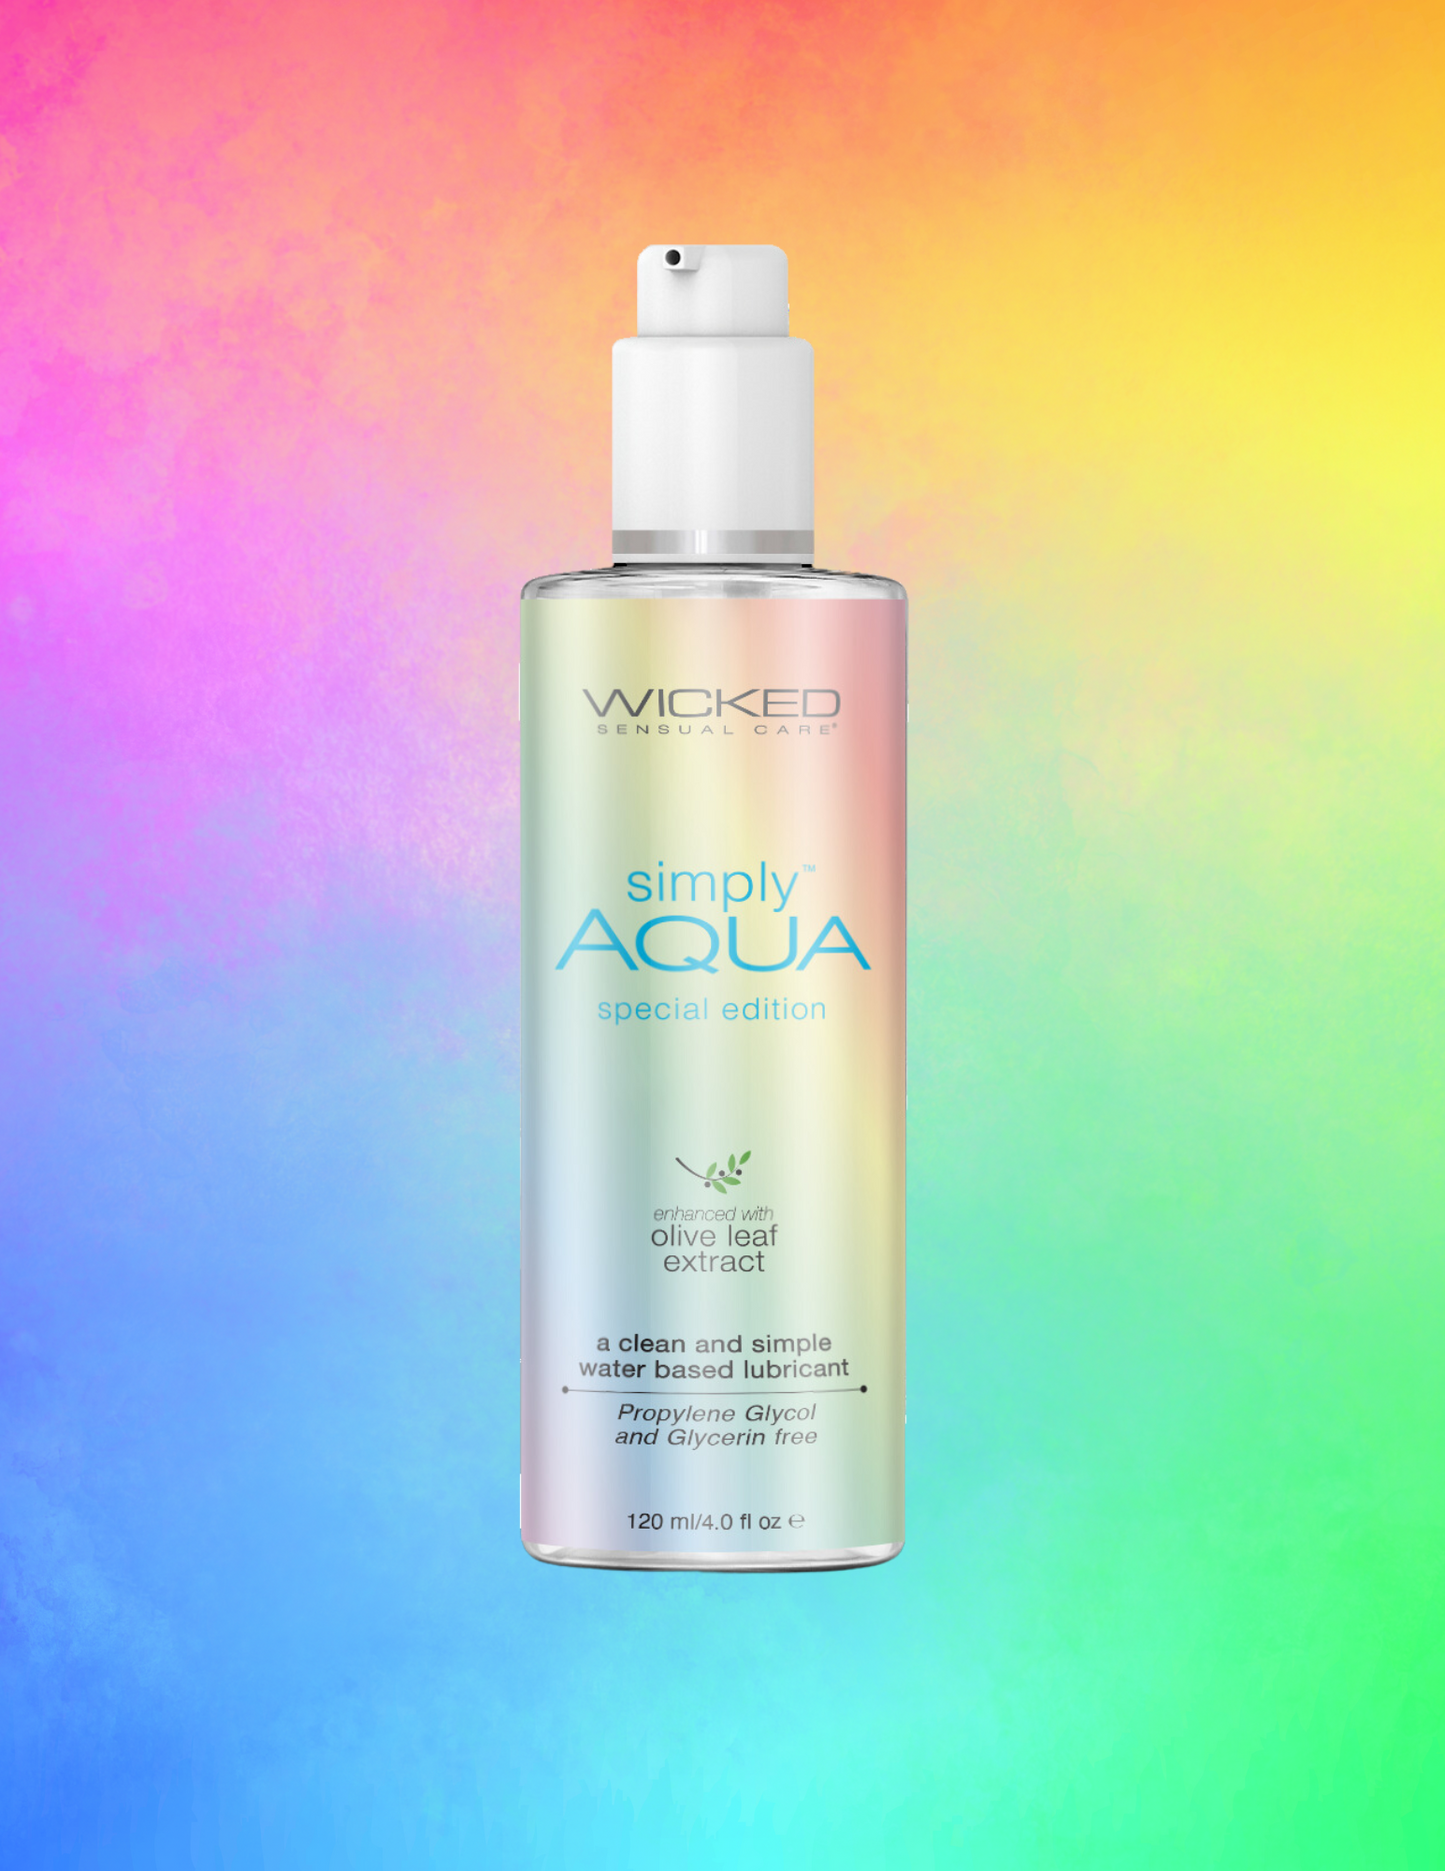 The Simply Aqua Special Edition bottle.